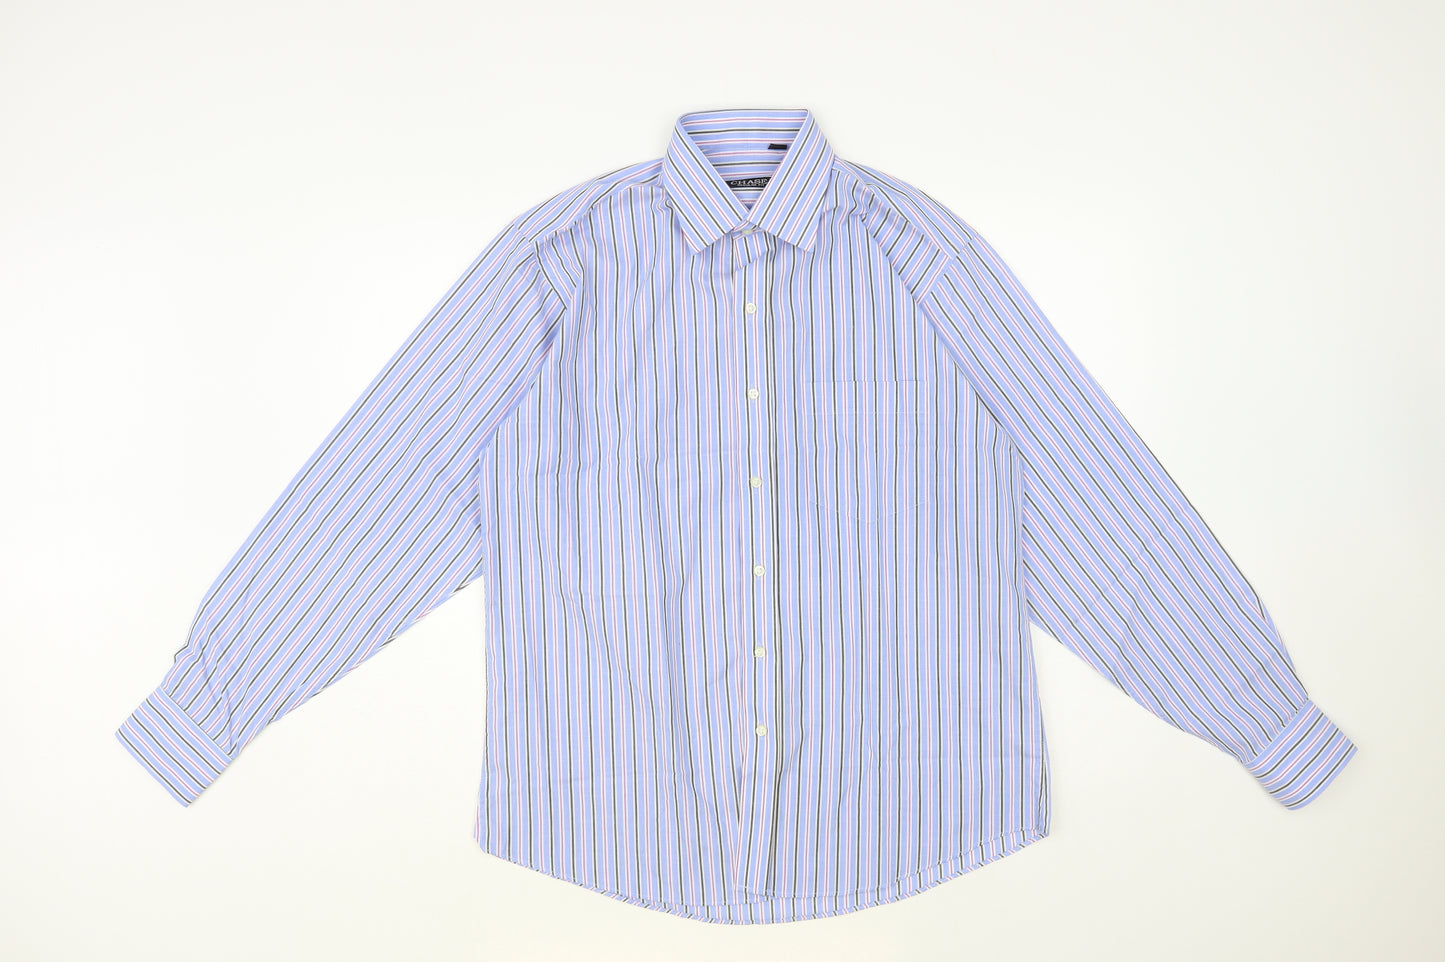 Chase Up Mens Blue Striped Cotton Dress Shirt Size 15.5 Collared Button